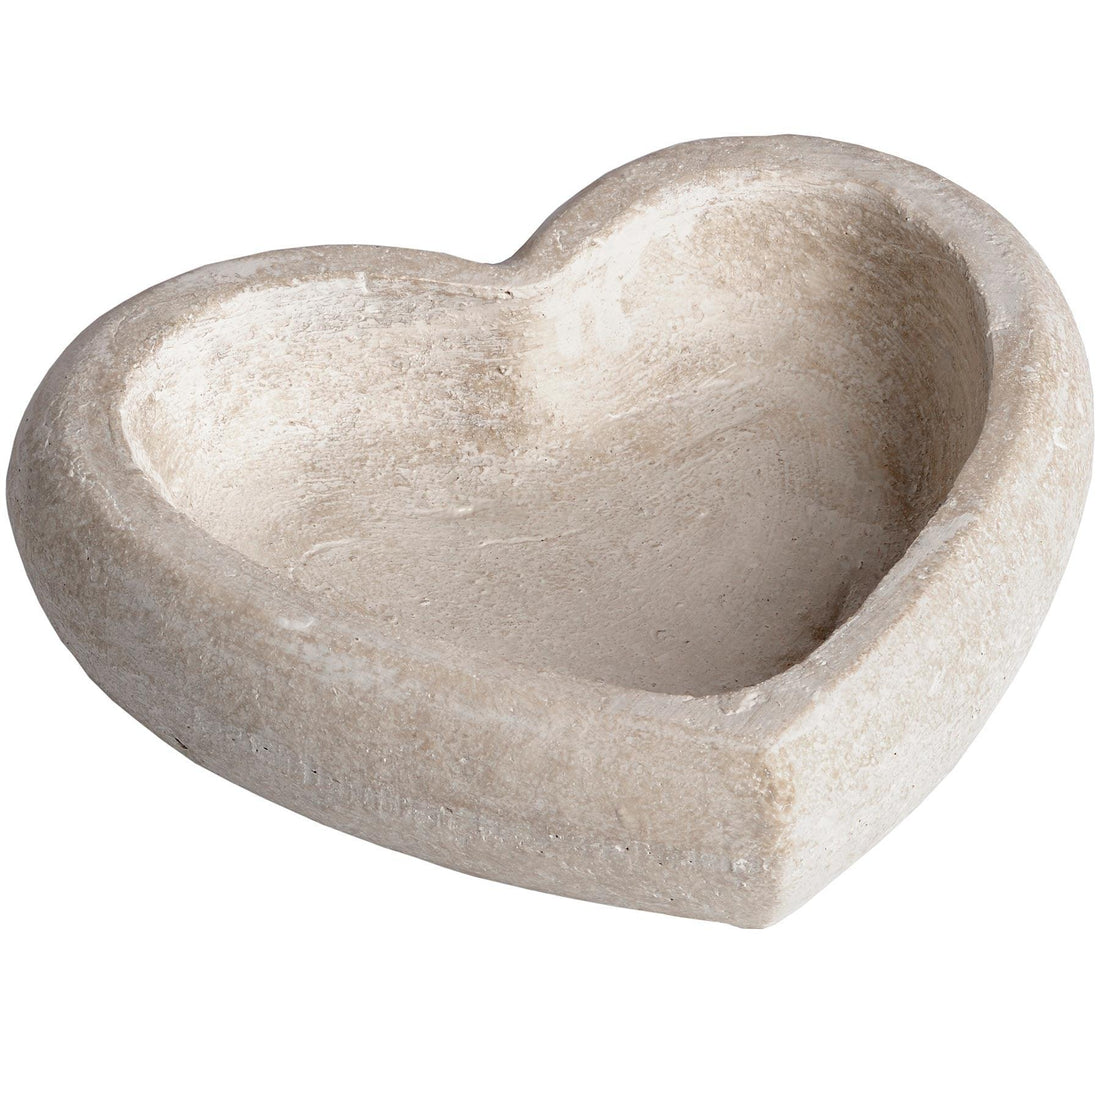 Deep Stone Heart Dish - £29.95 - Gifts & Accessories > Kitchen And Tableware > Dishes 